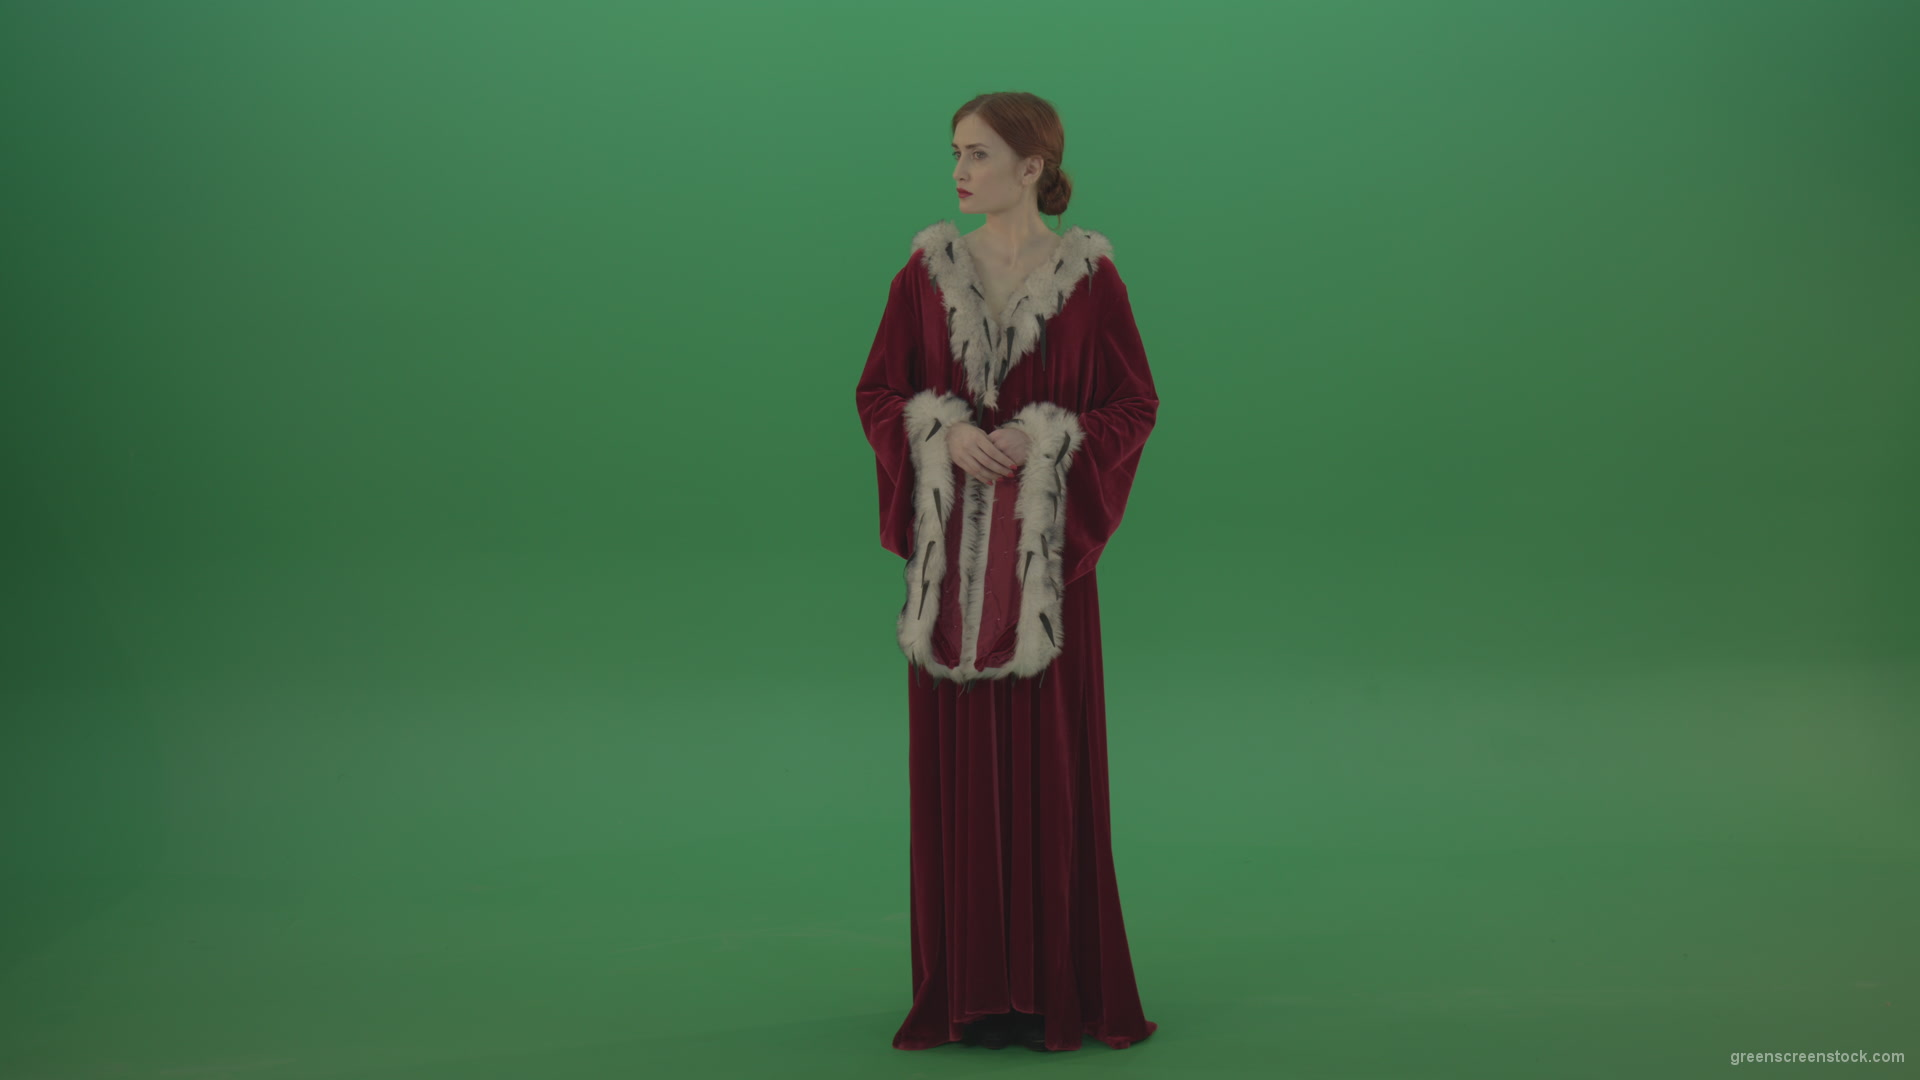 Princess-thinks-and-elegantly-gracefully-turns-her-head-in-different-directions_005 Green Screen Stock